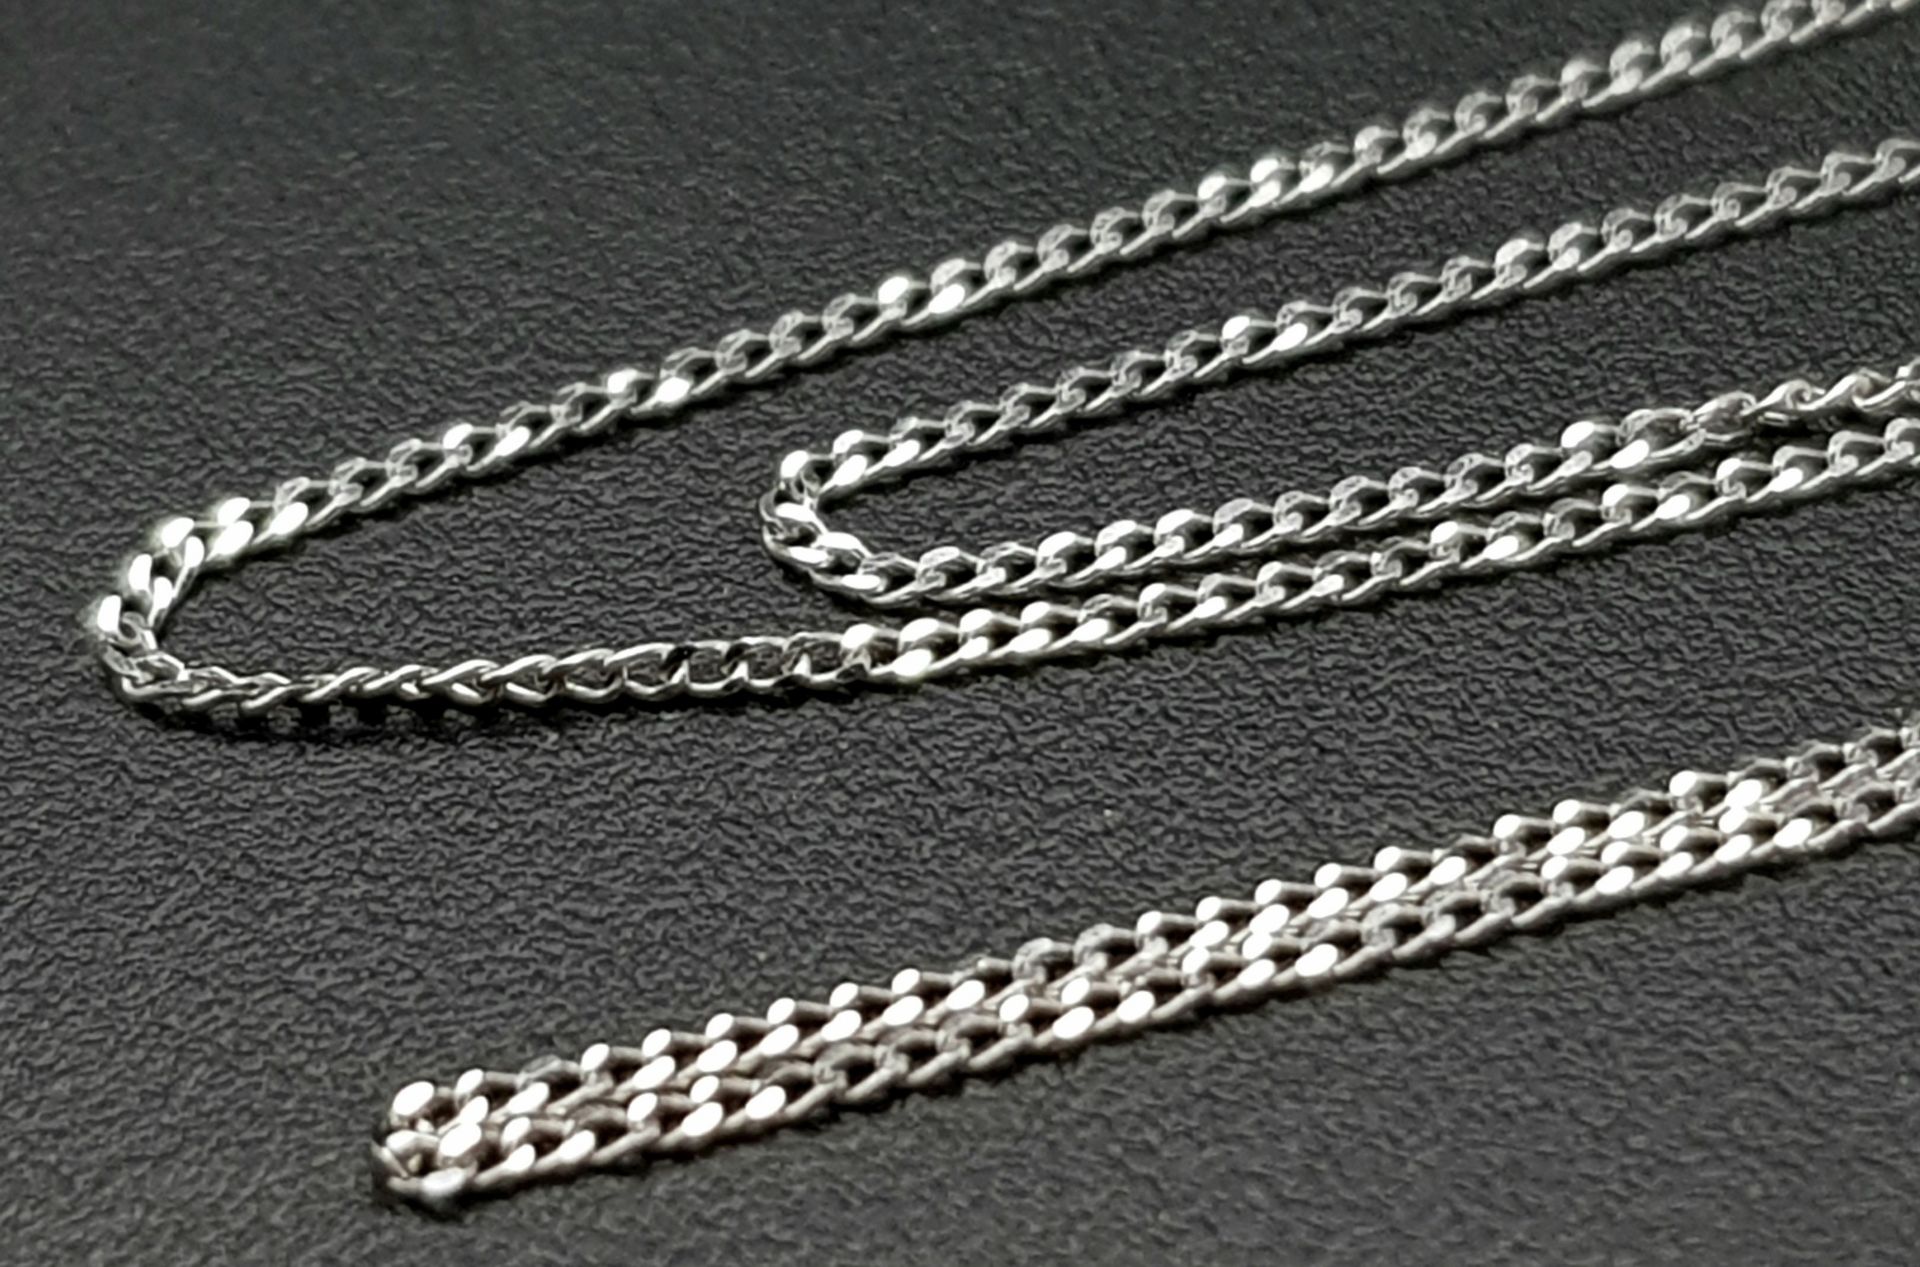 A 9 K white gold disappearing chain necklace, length: 46 cm, weight: 0.5 g. - Image 3 of 4